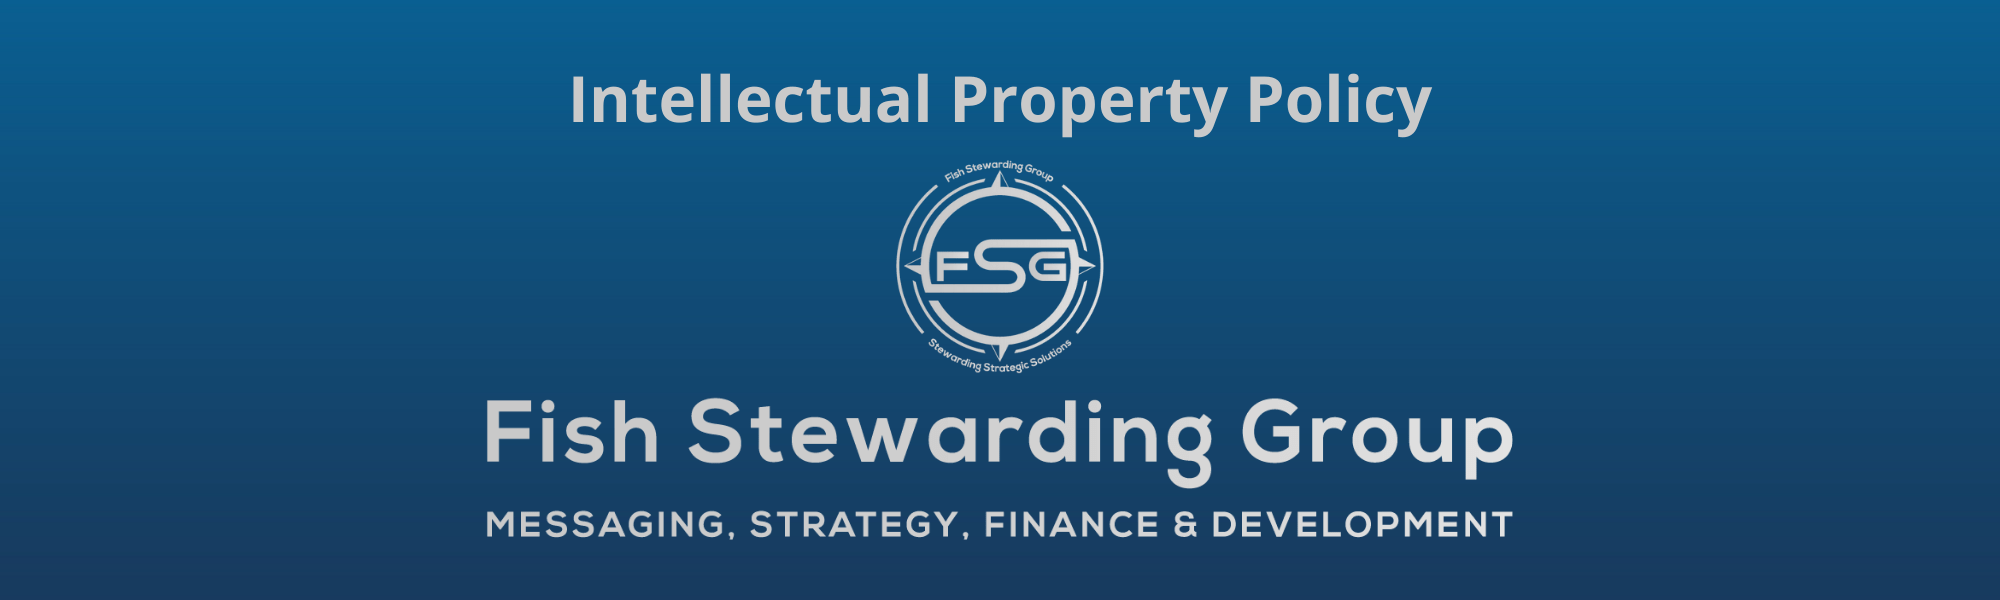 A thin rectangular Footer graphic for the Intellectual Property Policy page. The background is a blue gradient color that goes from a dark blue on the bottom to a lighter blue on top. The text in gray on top reads Intellectual Property Policy. The text in gray on the bottom center reads: Fish Stewarding Group and beneath that, the text reads Messaging, Strategy, Finance and Development. In the center above the text is the FSG logo in gray. The logo has the letters FSG in the middle with a circle with four pointed arrows facing north, south, east and west with the S connected to that circle. Four rounded lines make the next circle of the circle and the last layer is a thin circle with the text on the Bottom that reads Stewarding Strategist Solutions and on top, the text reads Fish Stewarding Group.